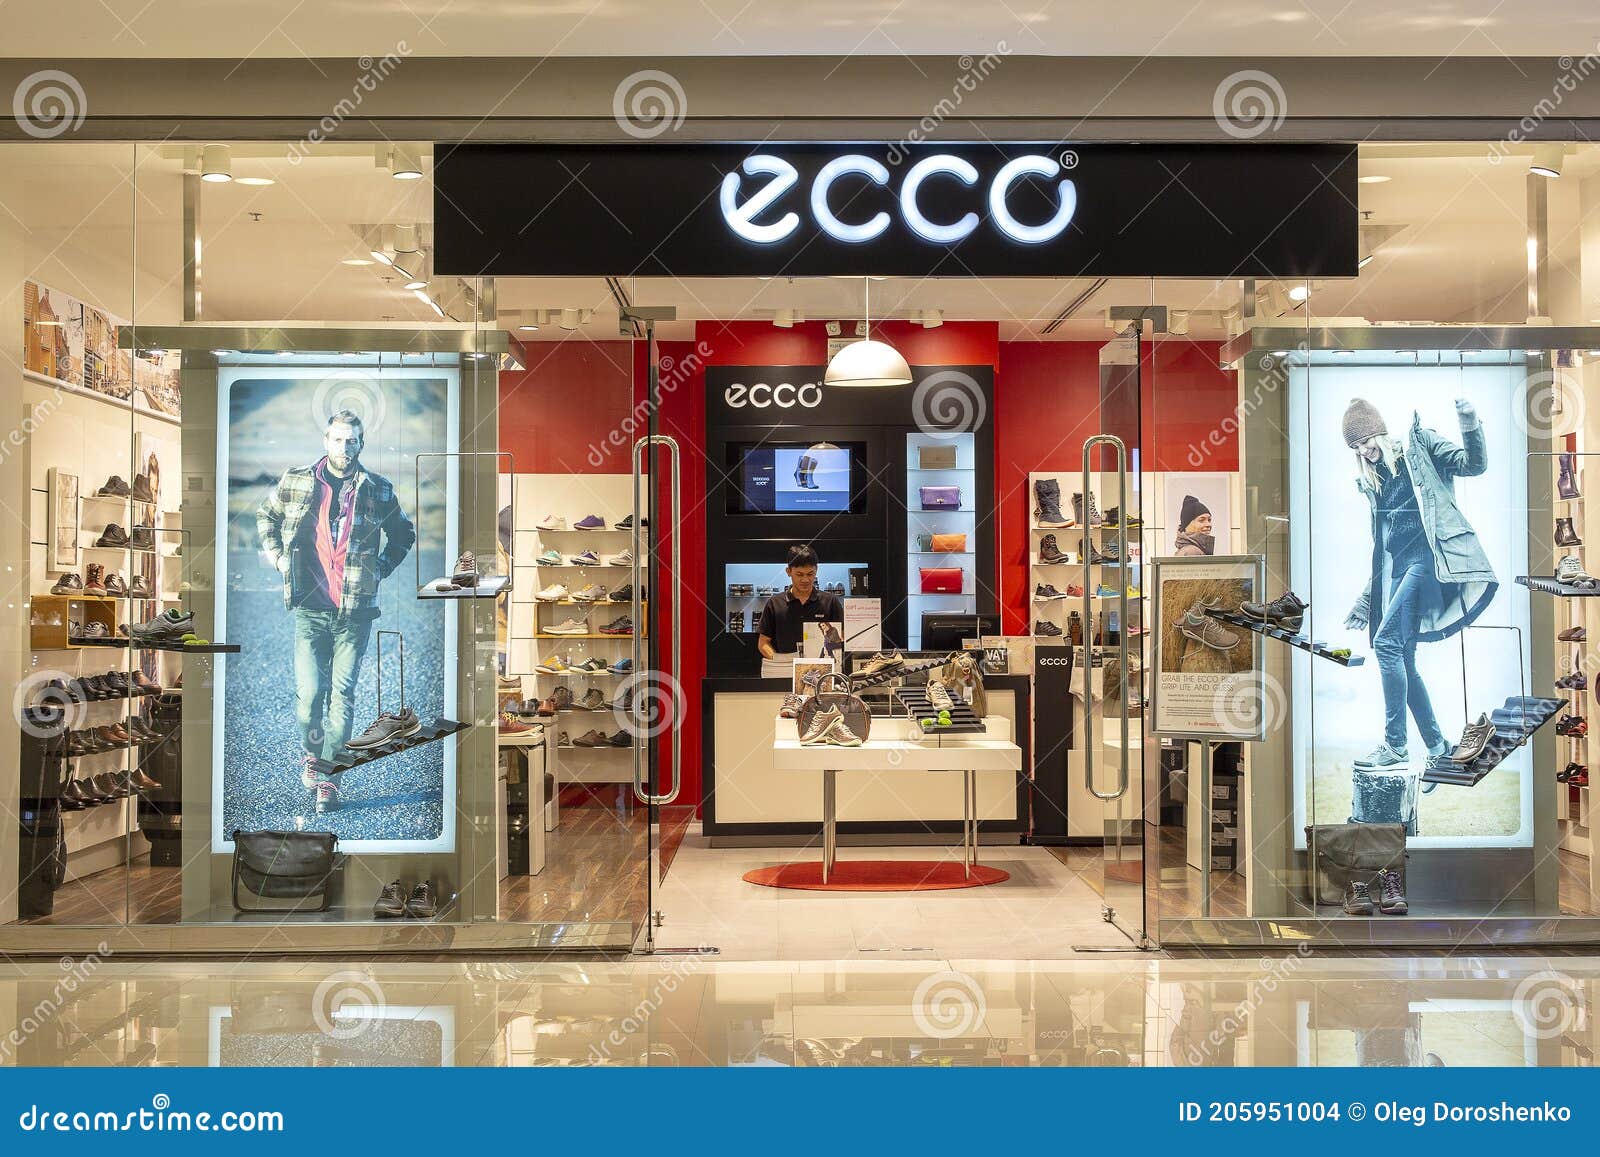 ecco shoes chatswood chase